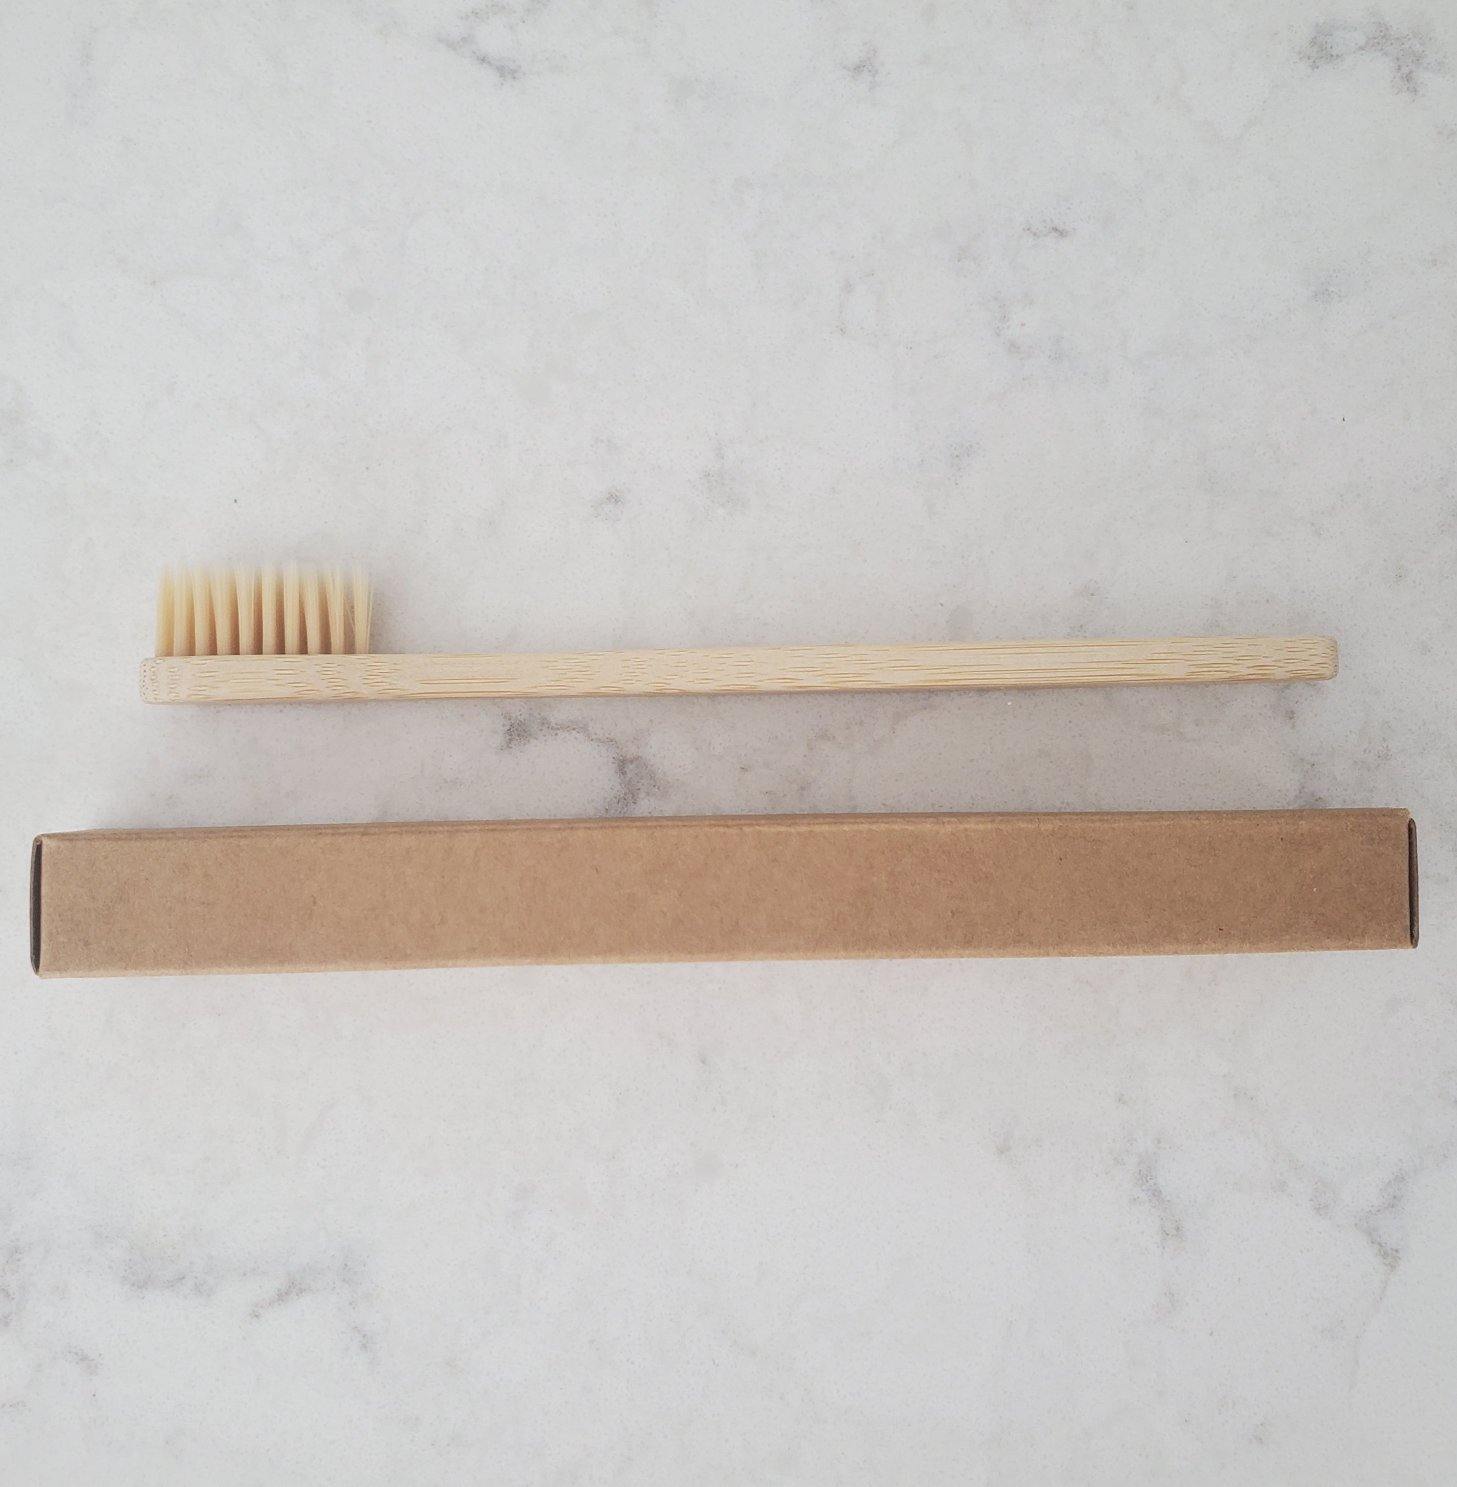 Bamboo Toothbrush - for Kids - Earth Warrior Lifestyle